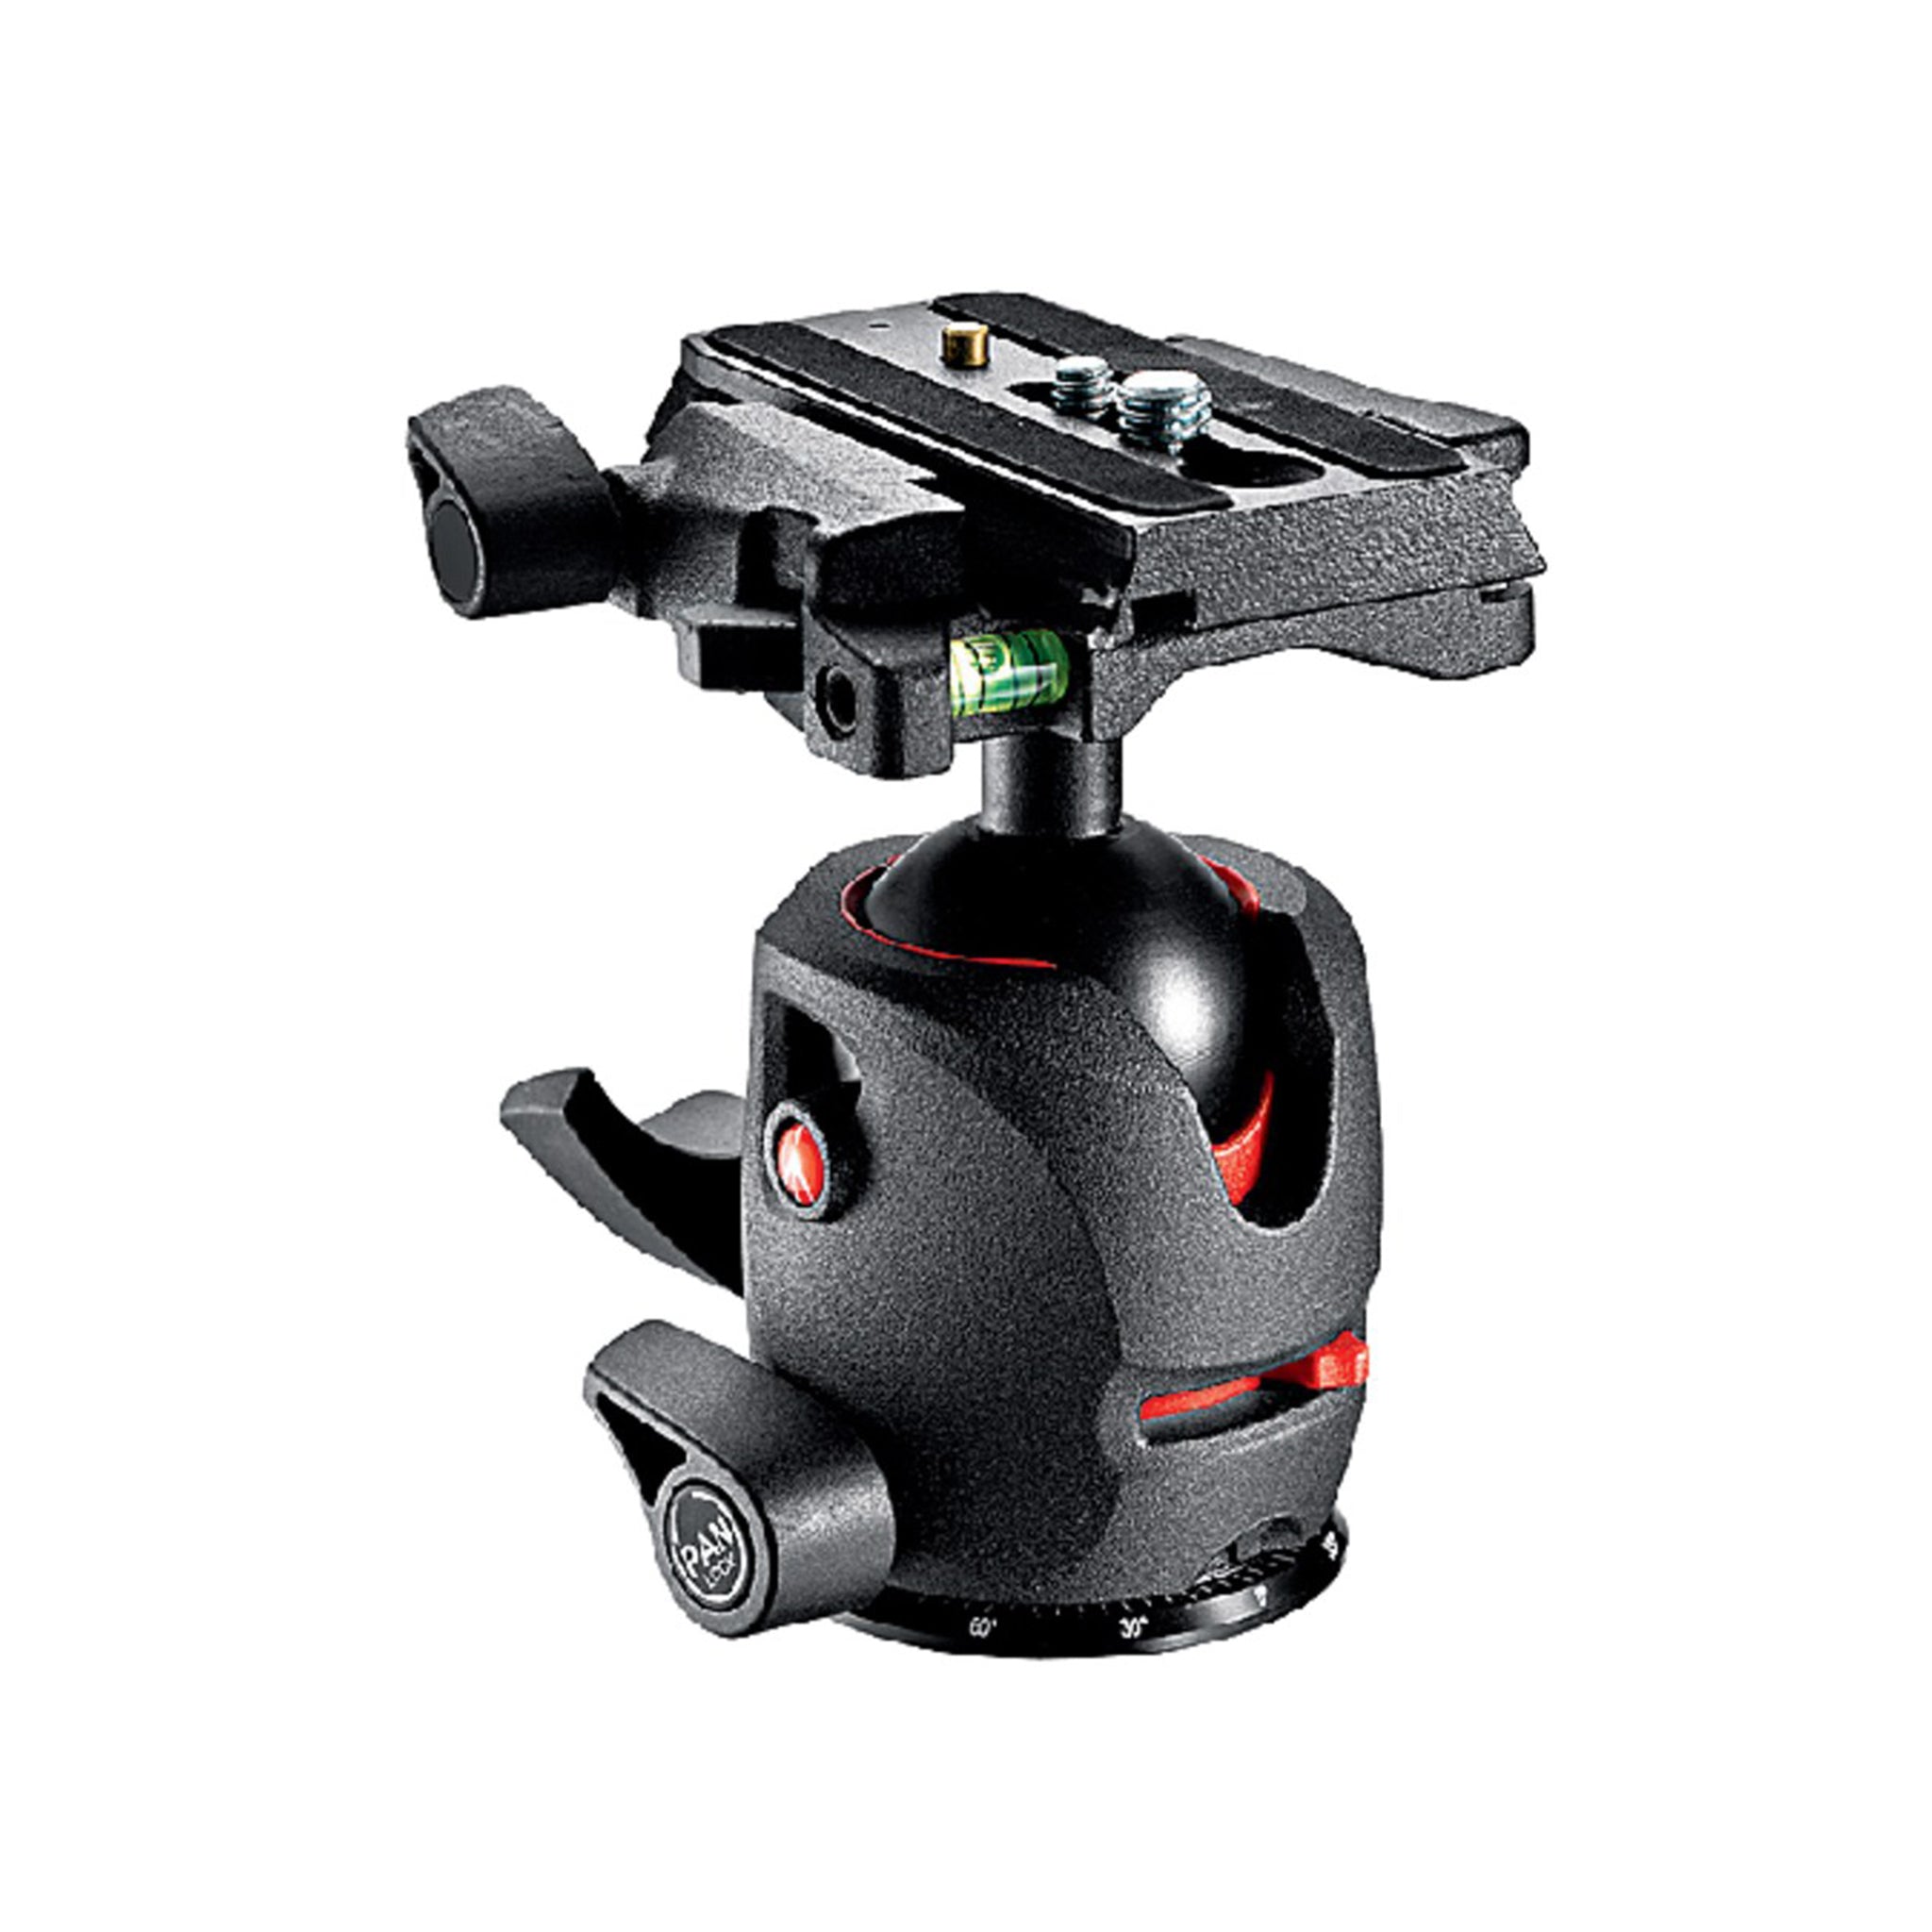 Manfrotto 054 Magnesium Ball Head With Q5 Quick Release